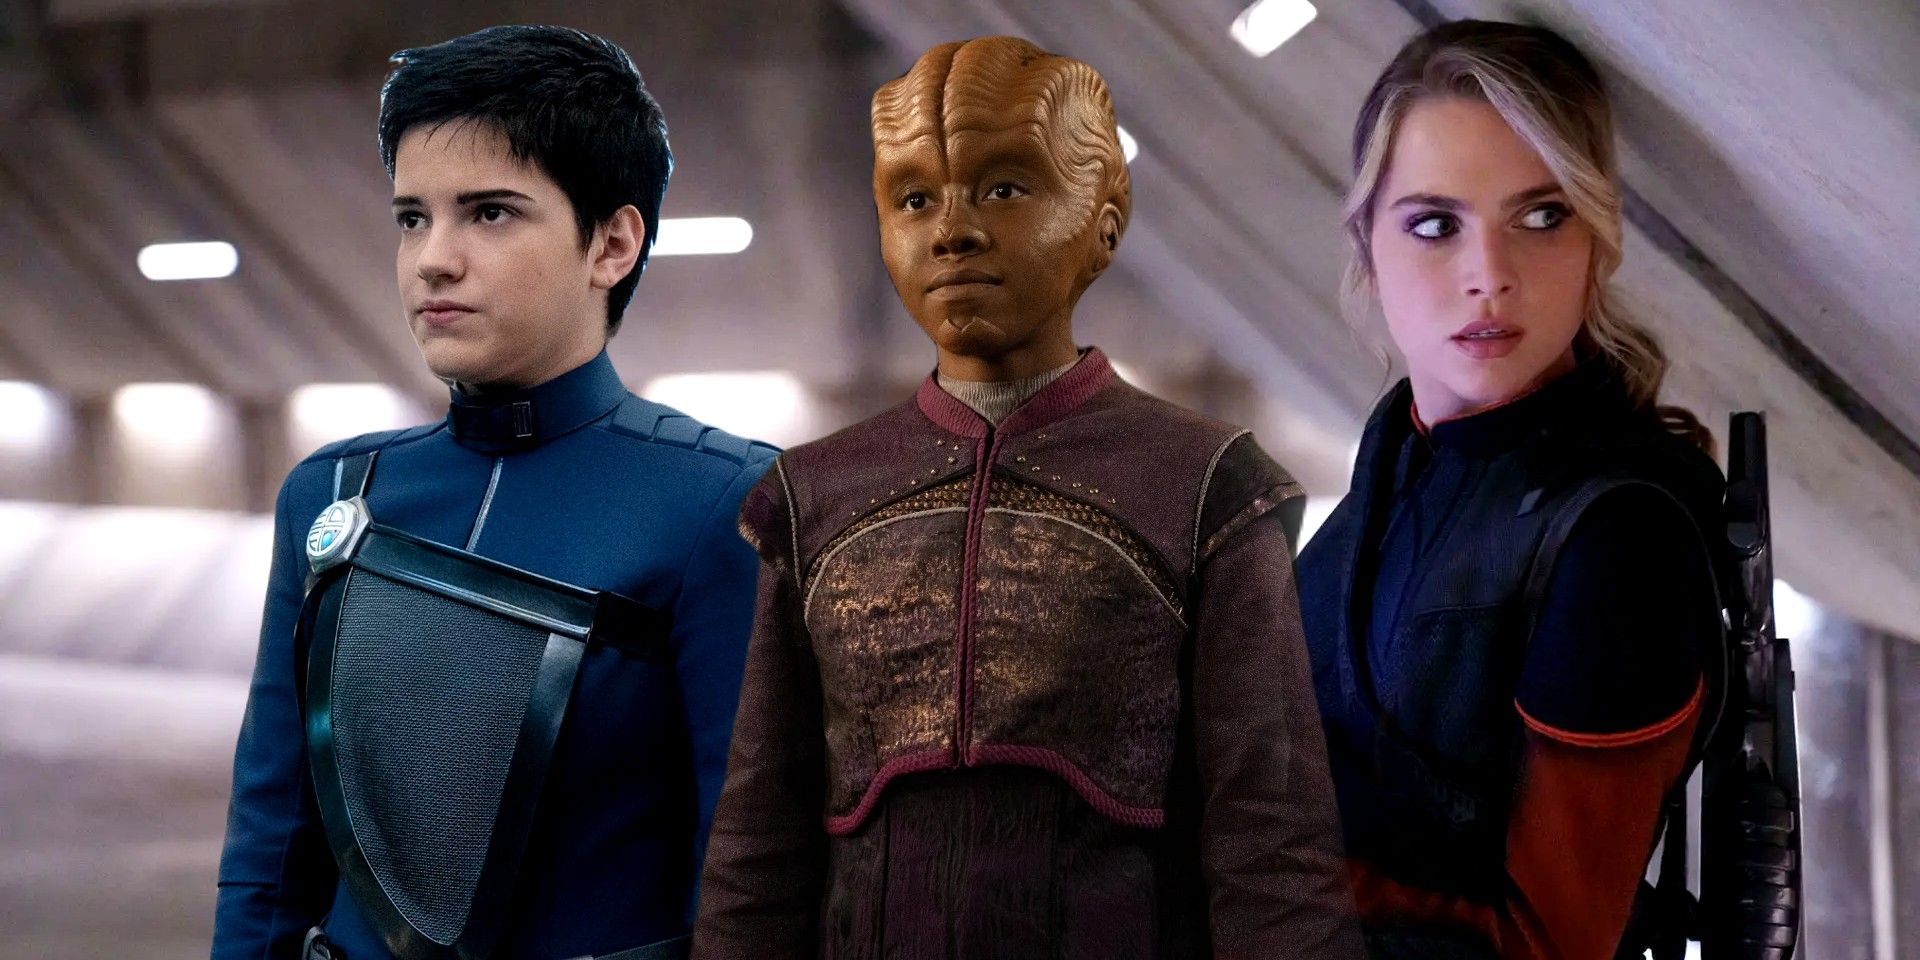 LGBTQ+ characters in The Orville and Star Trek